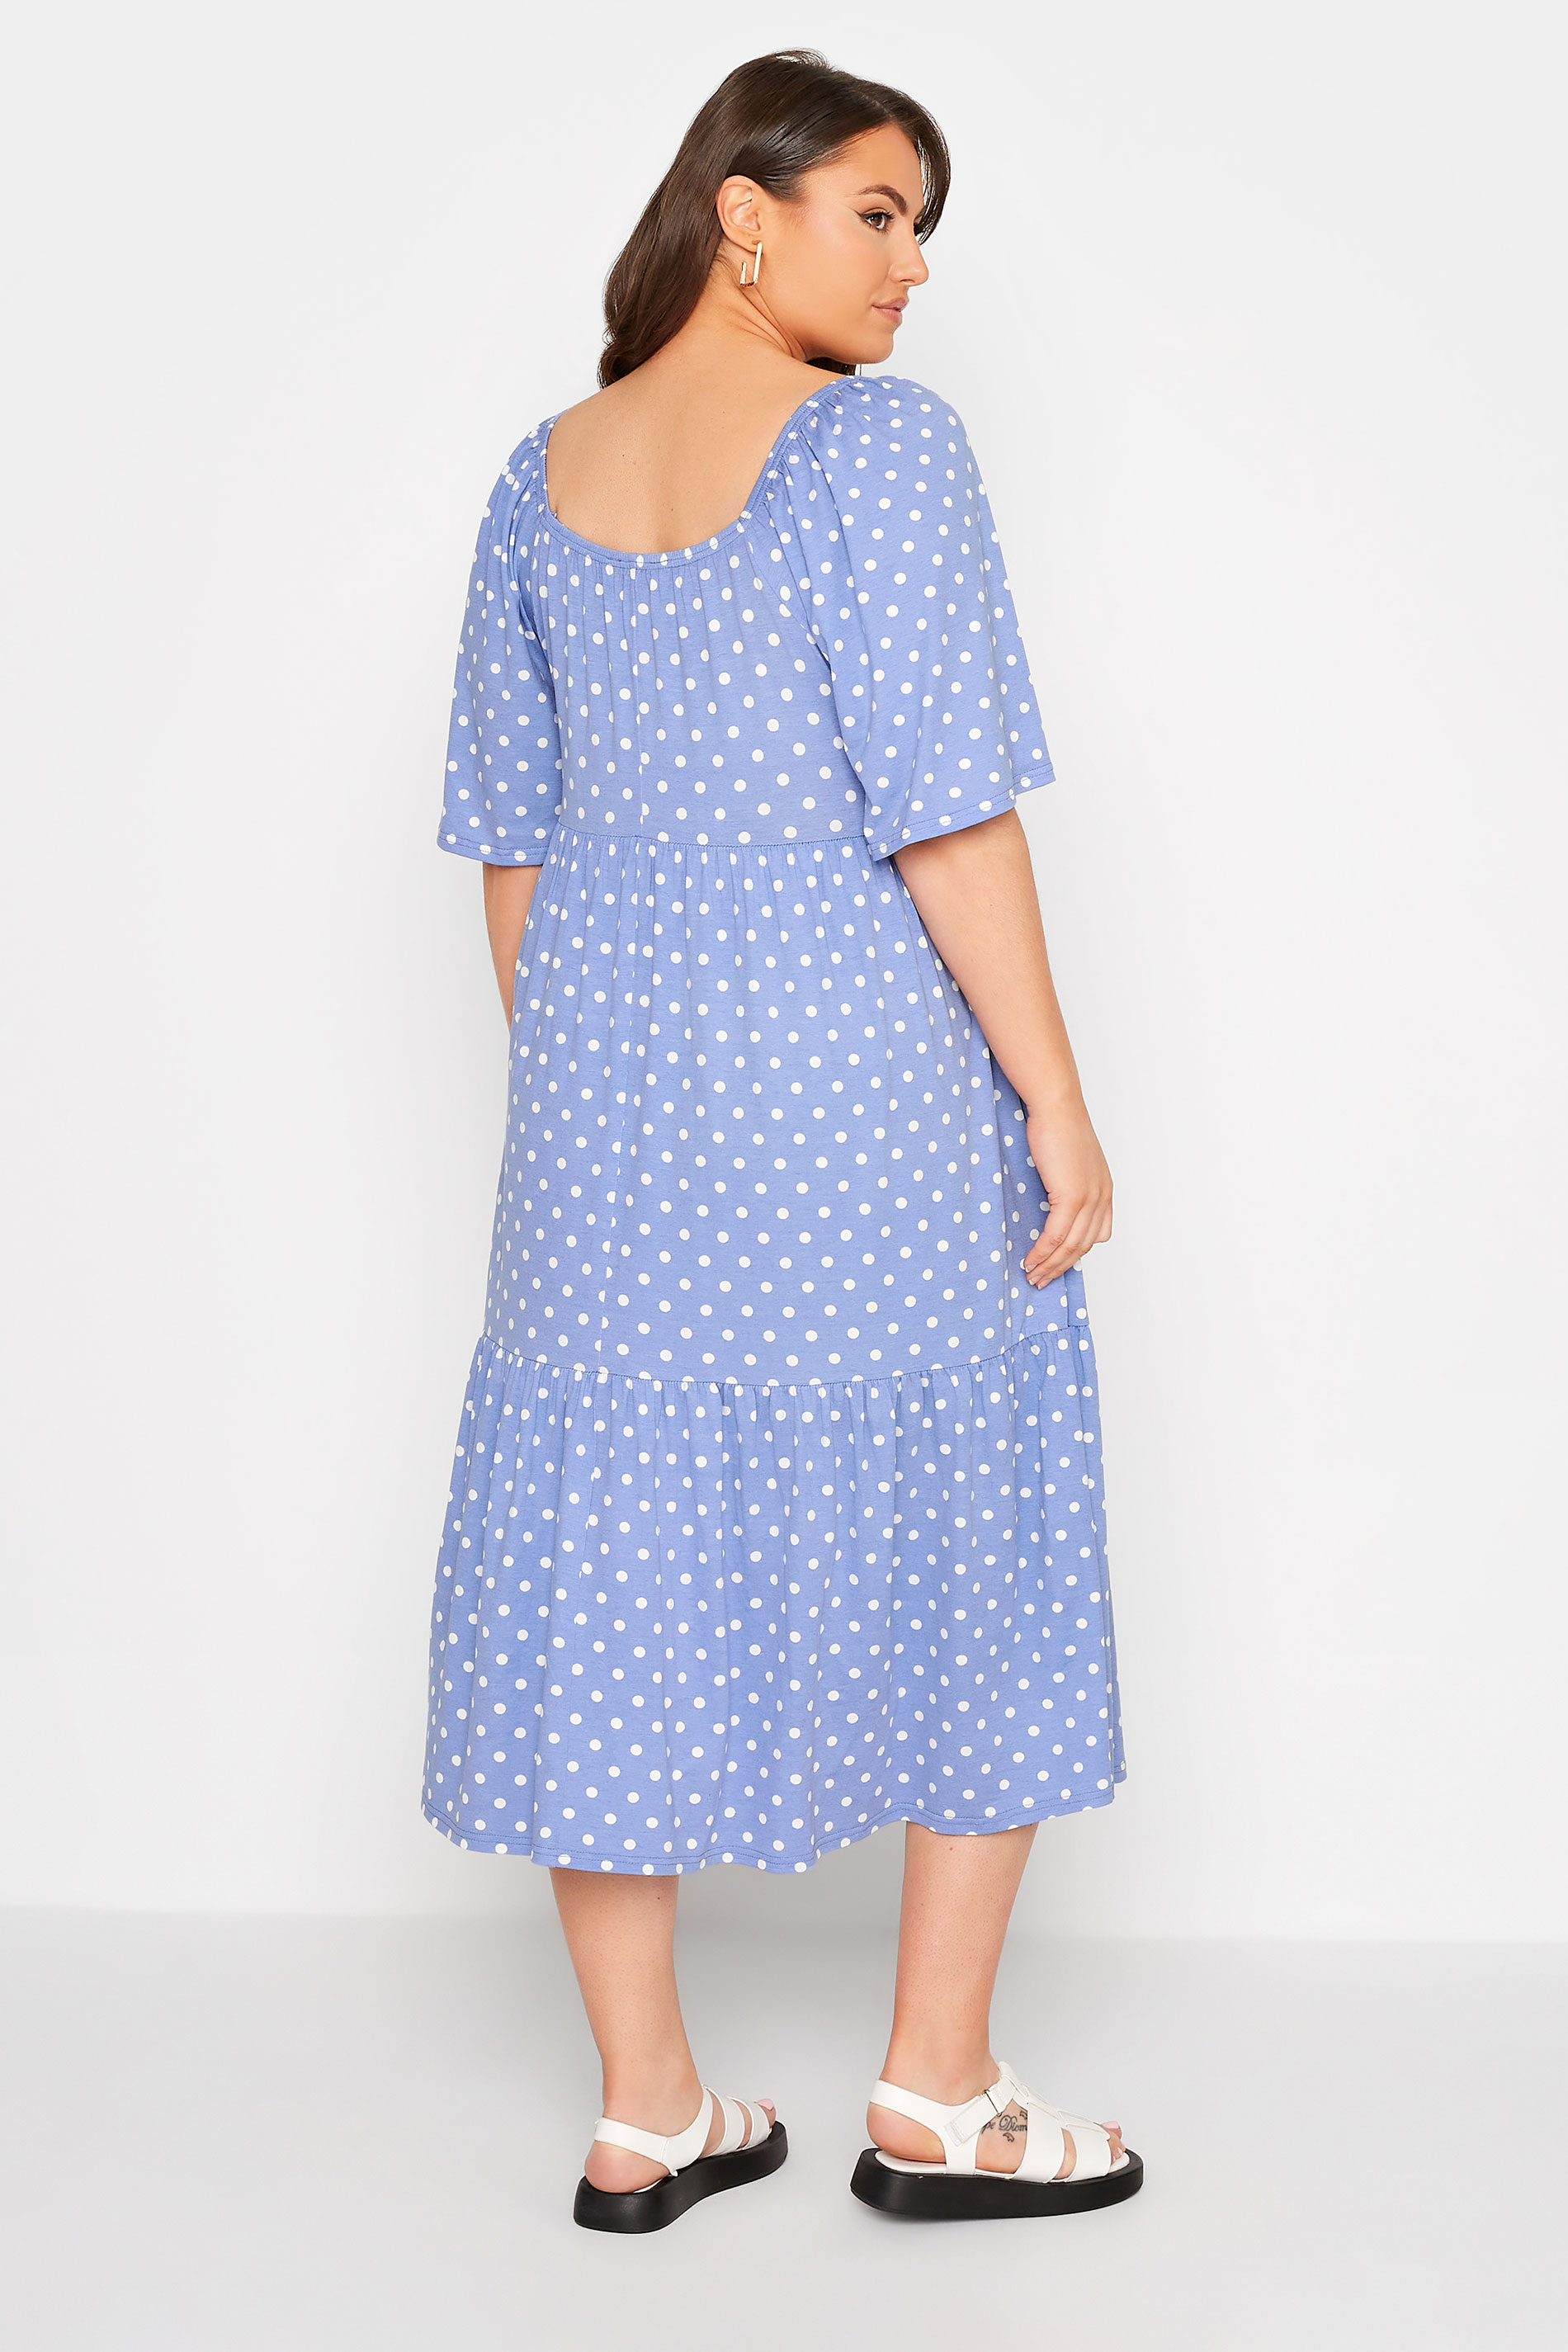 Plus Size Blue Polka Dot Print Square Neck Midaxi Dress | Yours Clothing 3